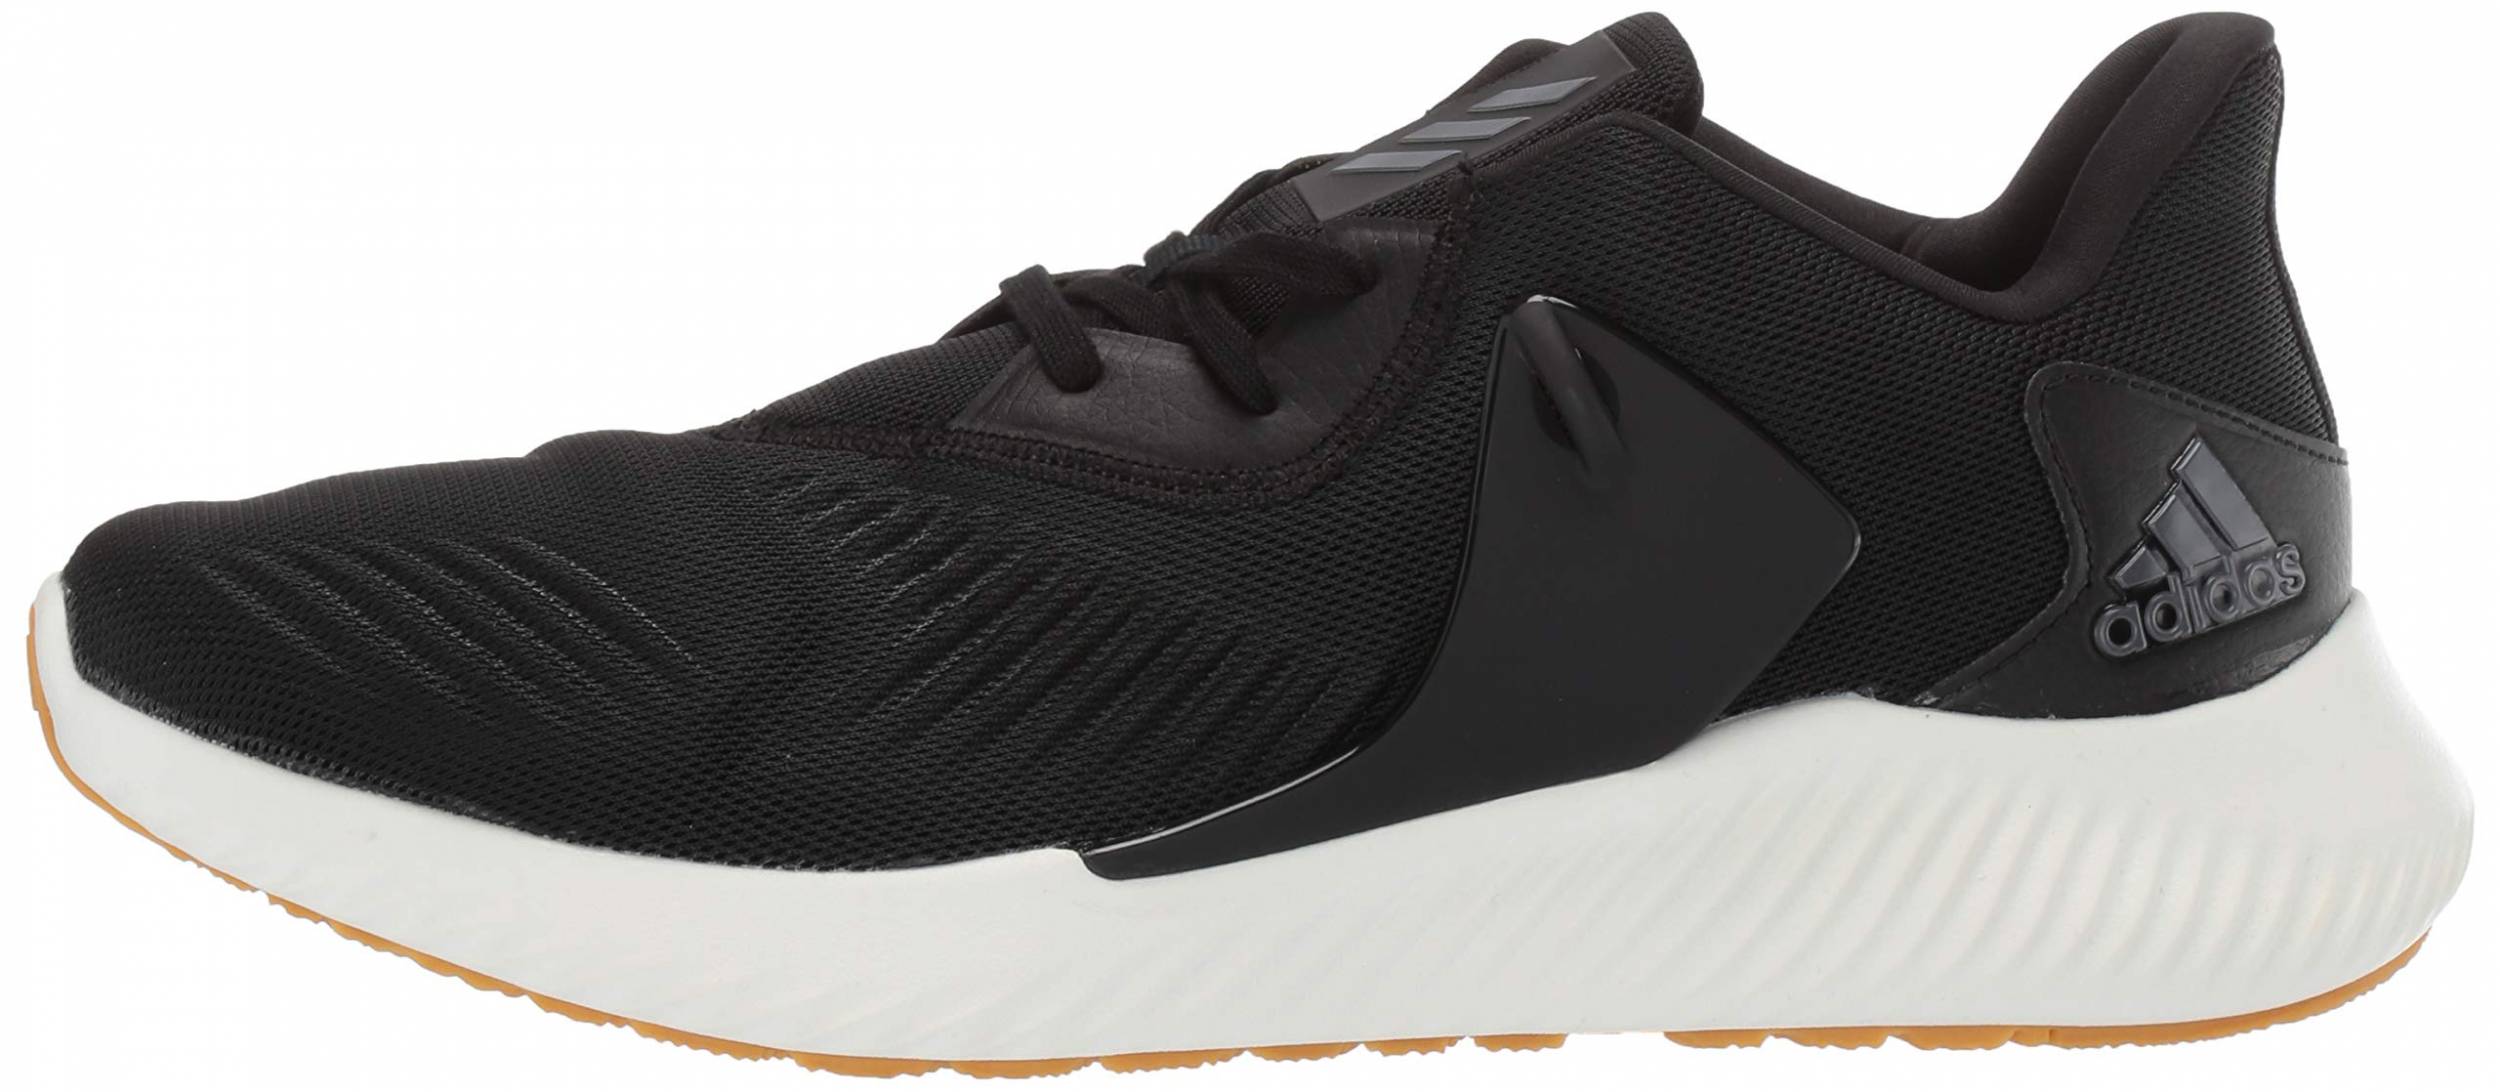 Adidas Alphabounce RC 2.0 - Deals ($61), Facts, Reviews (2021 ...